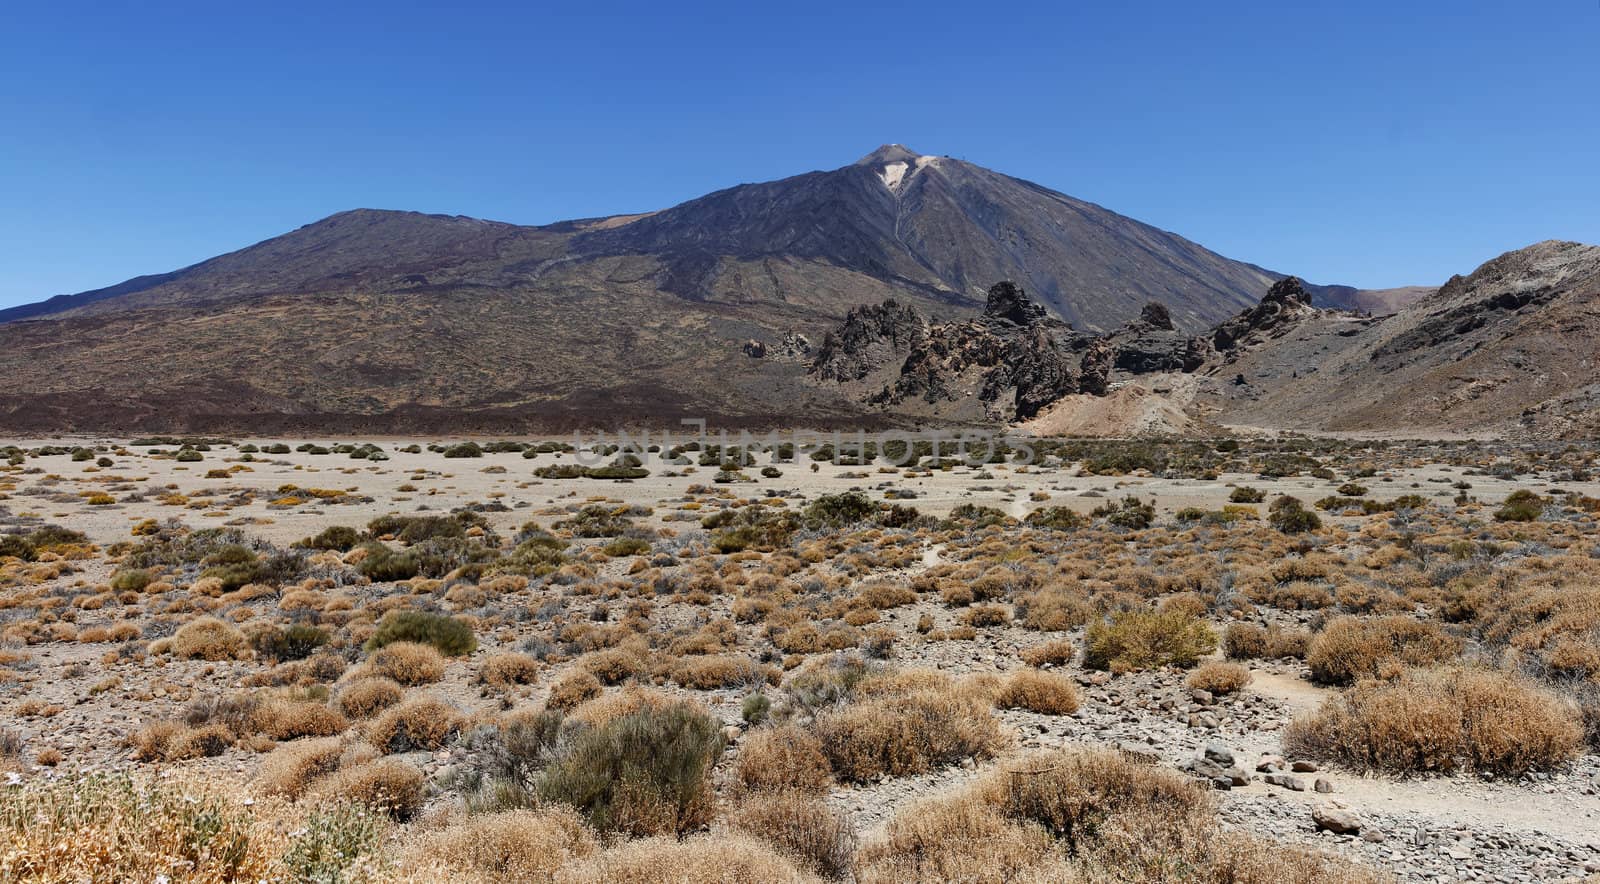 Panoramic image of the conical volcano Mount Teide or El Teide in Tenerife and its surrounding plateau. It has featured as the location of many hollywood films and is the premier tourist attraction in the Canary islands 